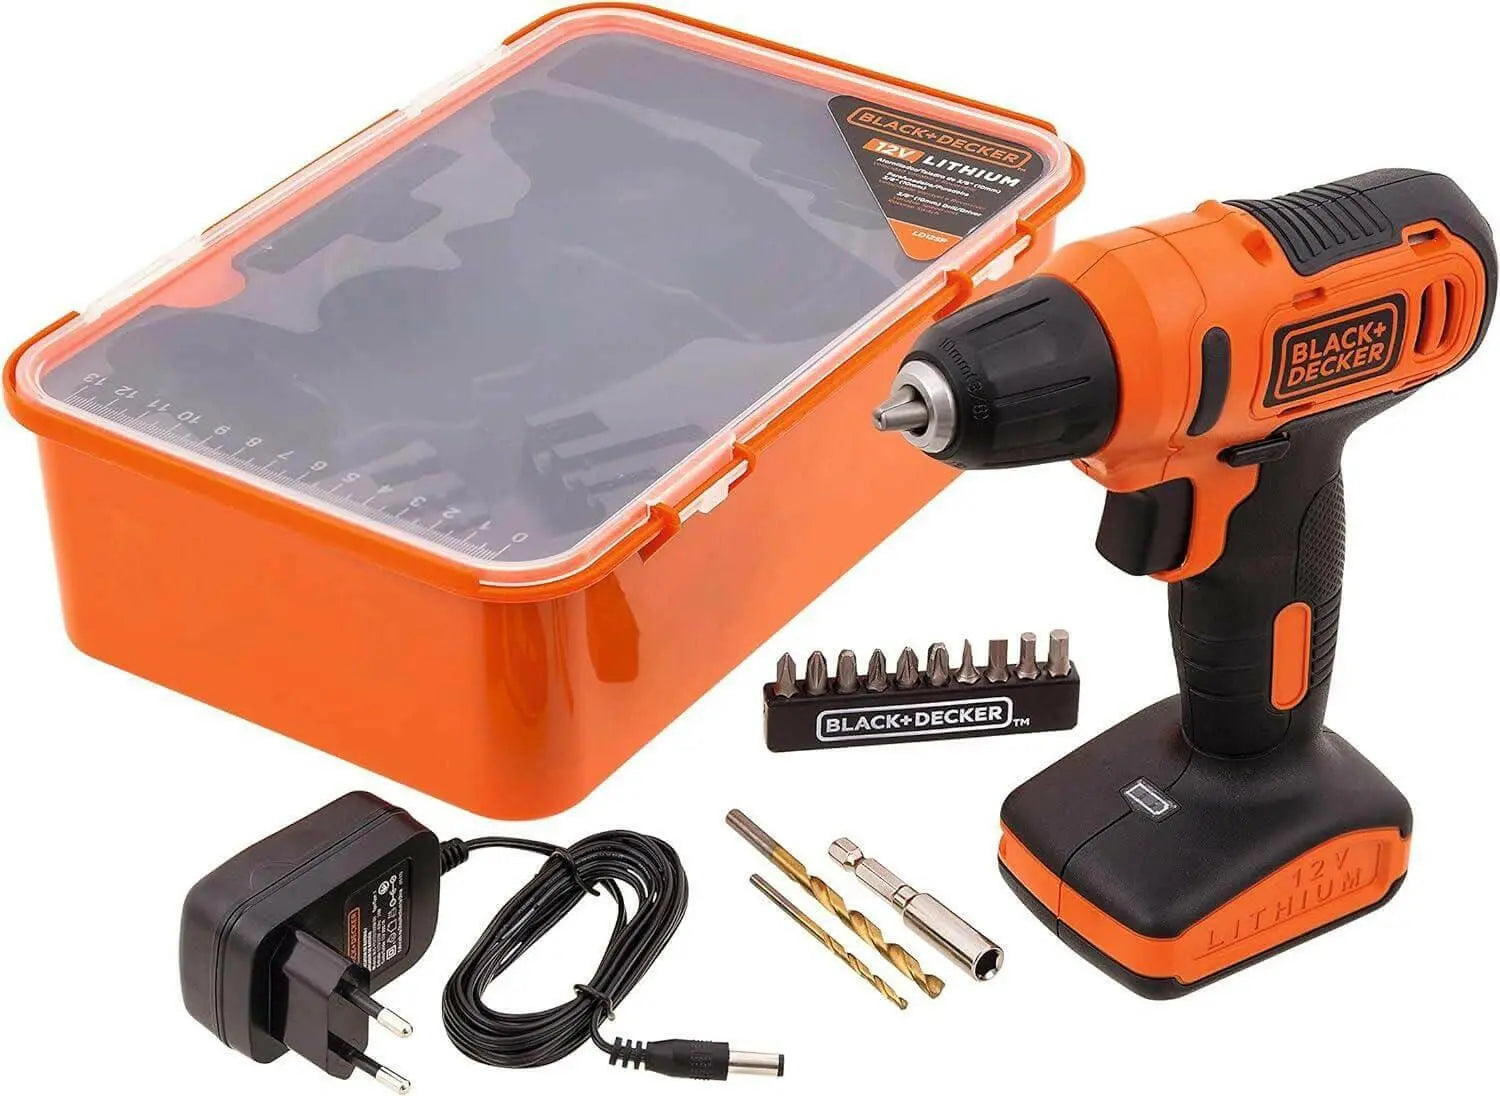 BLACK+DECKER 12V 1.5Ah 900 RPM Cordless Drill Driver with 13 Pieces Bits in Kitbox For Drilling and Fastening, Orange/Black, LD12SP-B5,